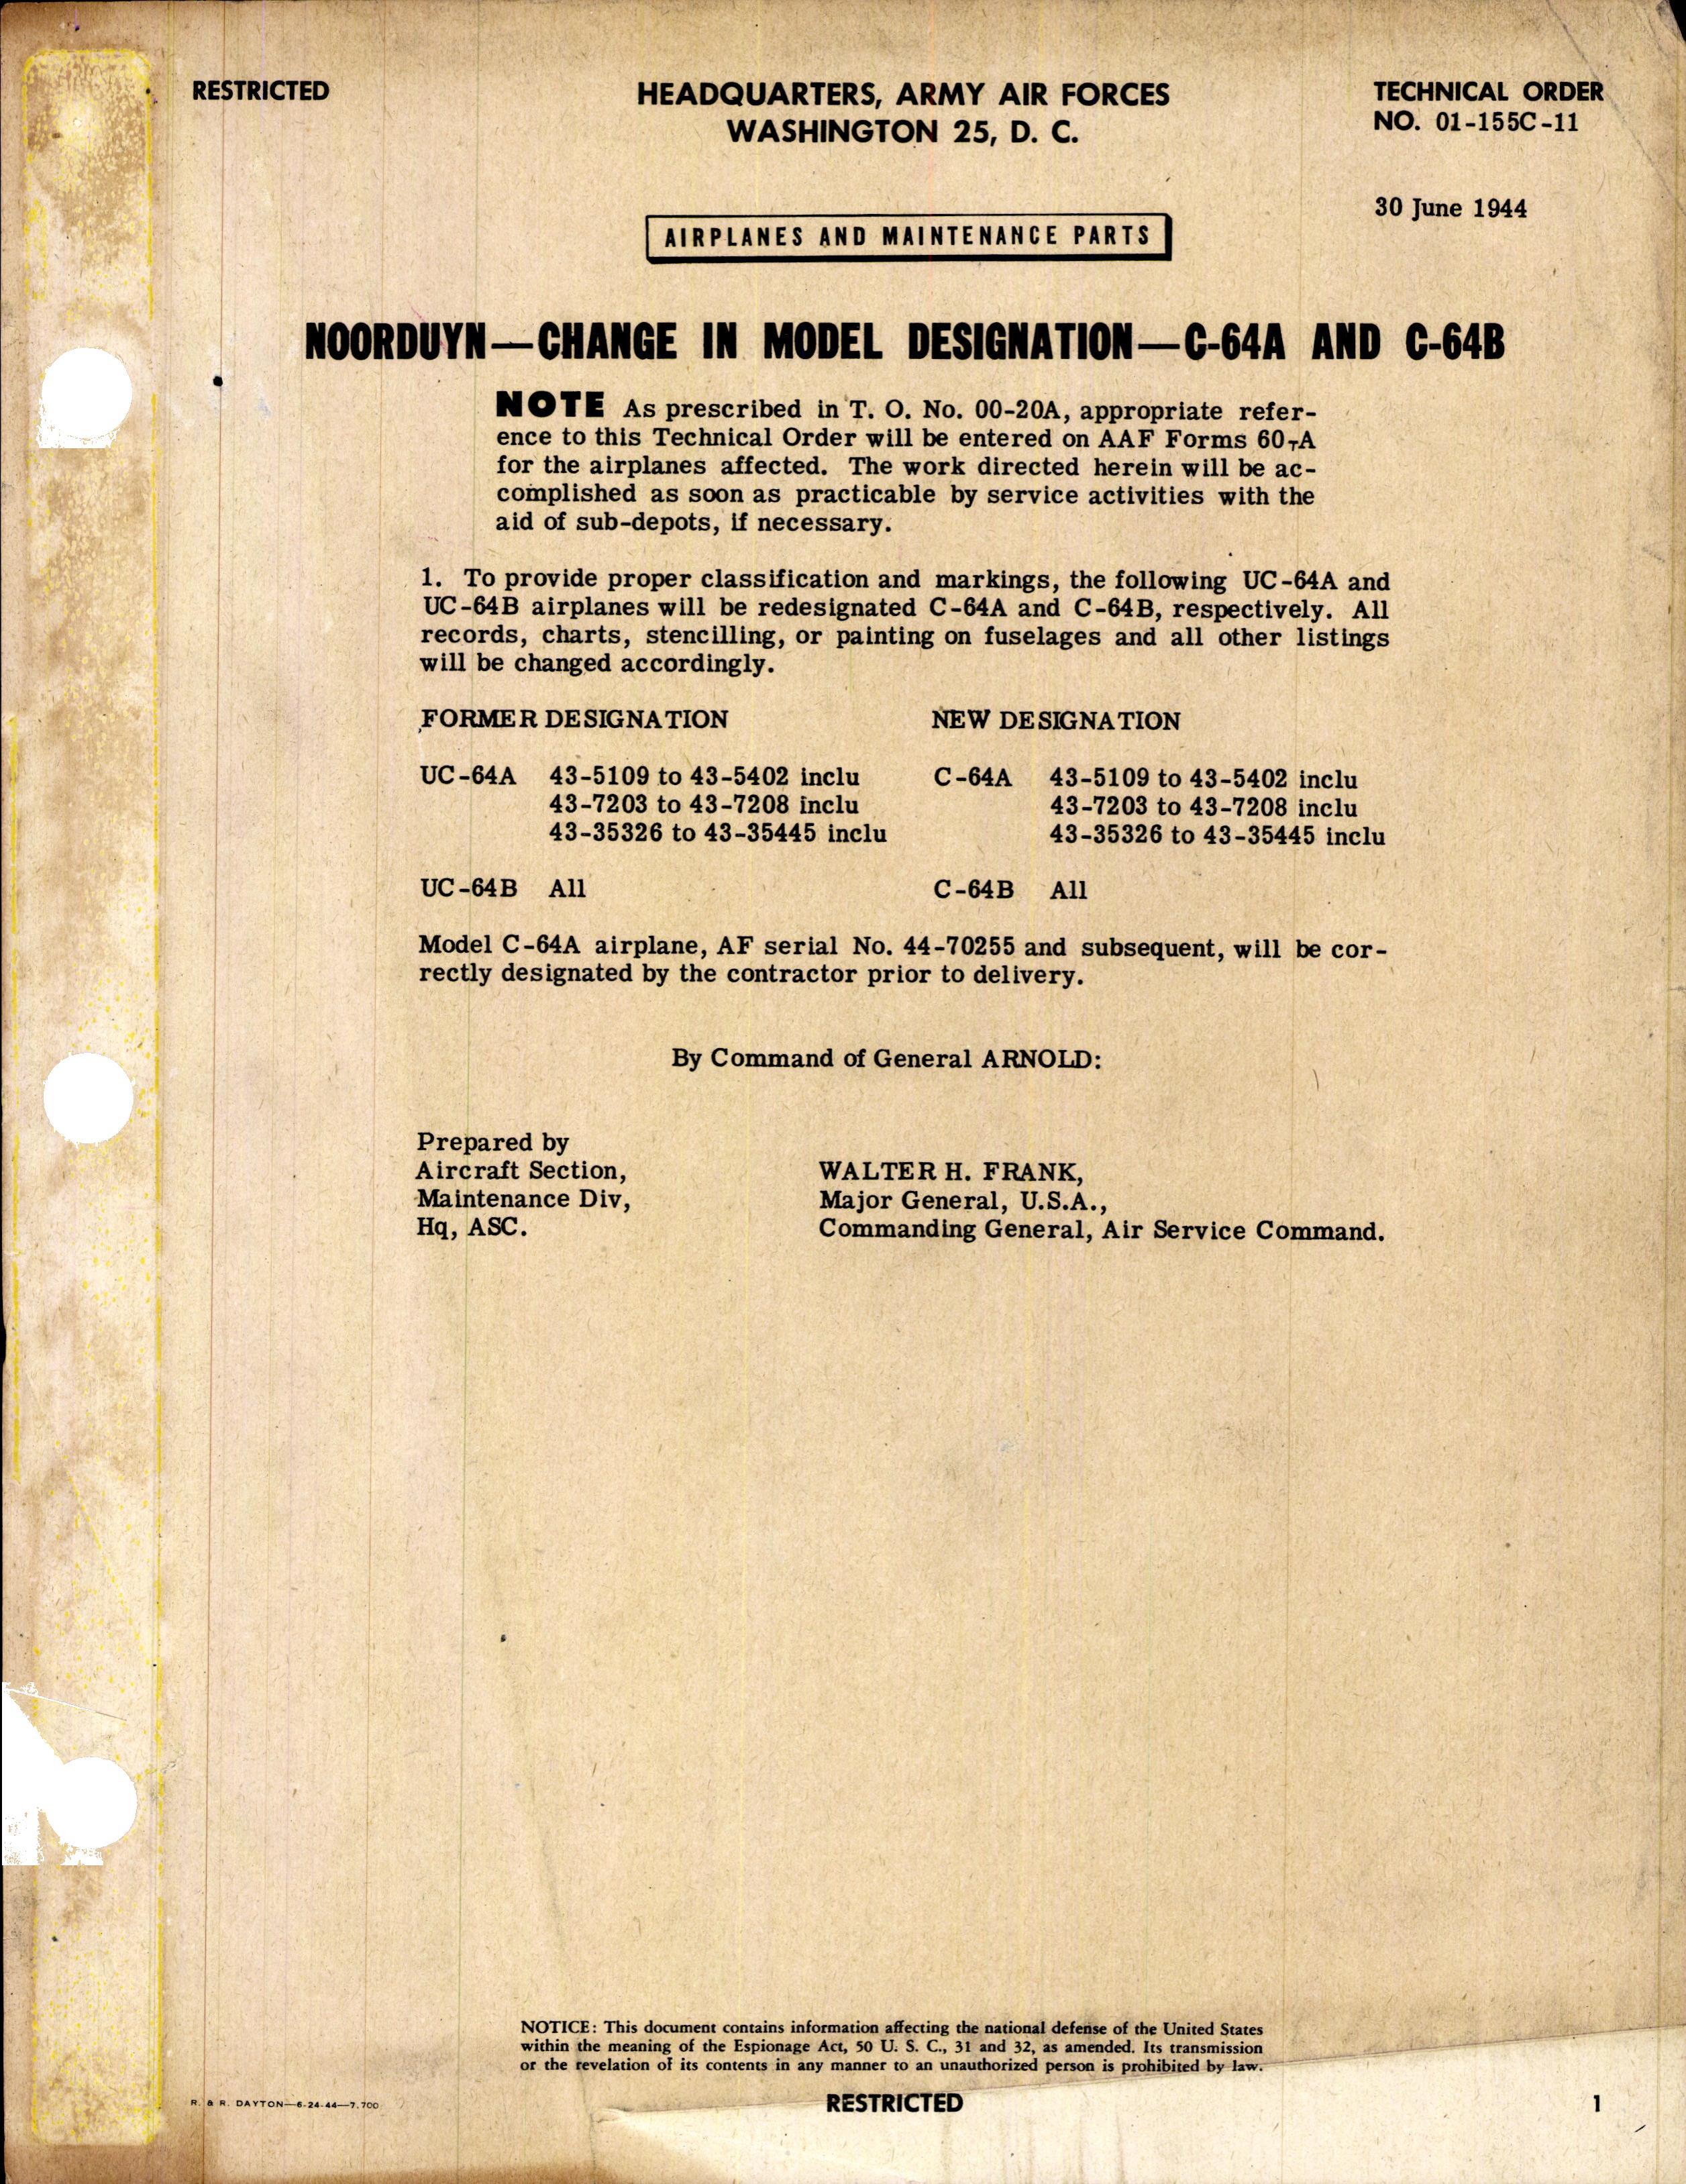 Sample page 1 from AirCorps Library document: Change in Model Designation for C-64A and C-64B